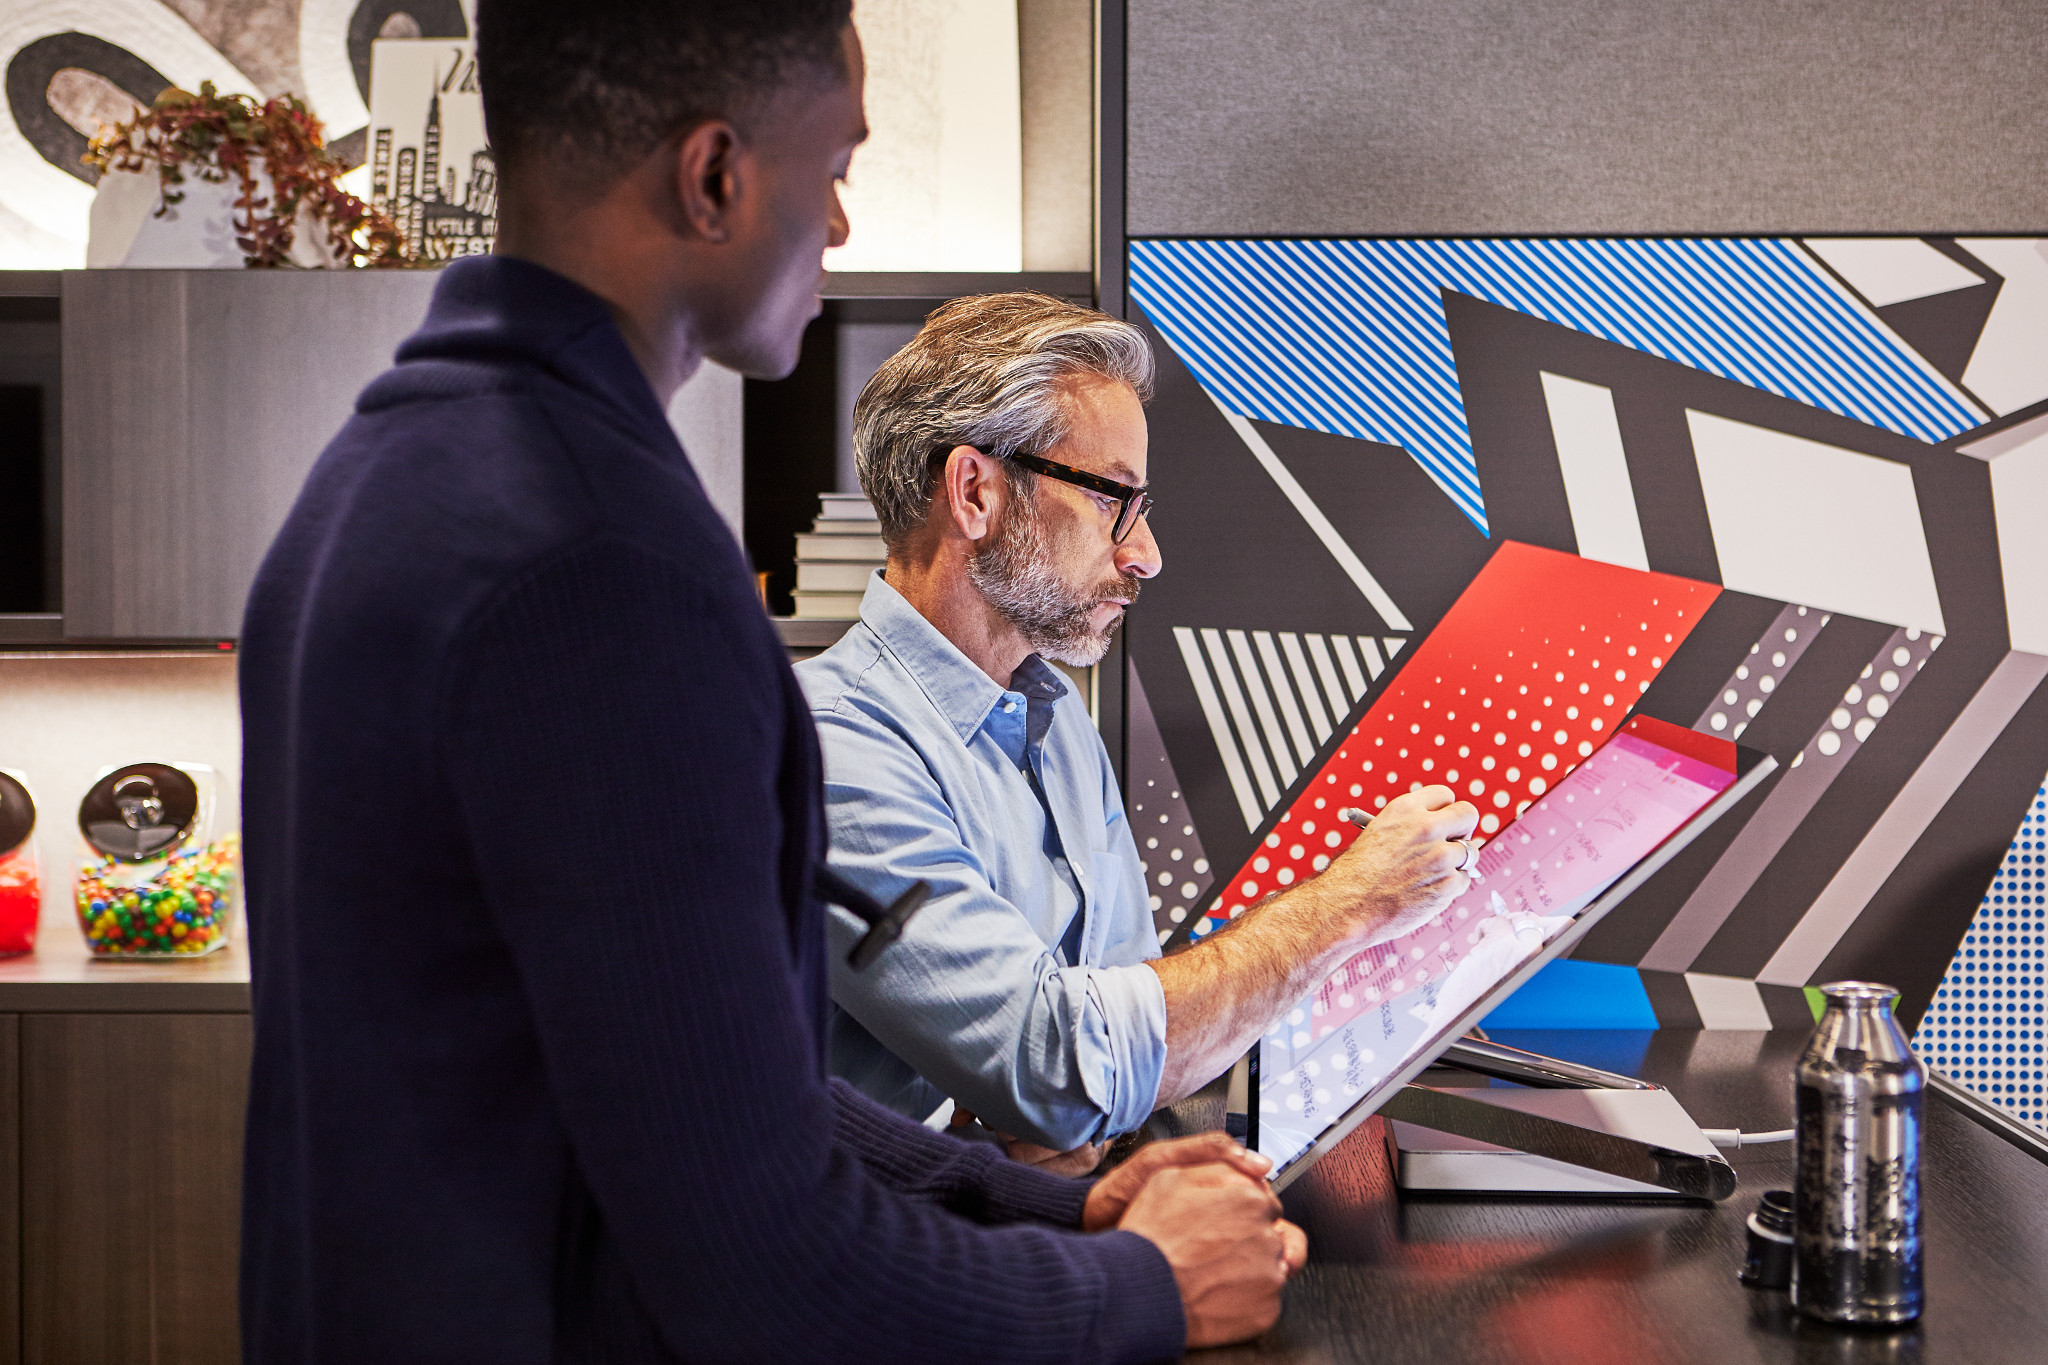 Surface Studio’s ability to move elegantly from Desktop Mode to Studio Mode means that you can write, draw and edit naturally.